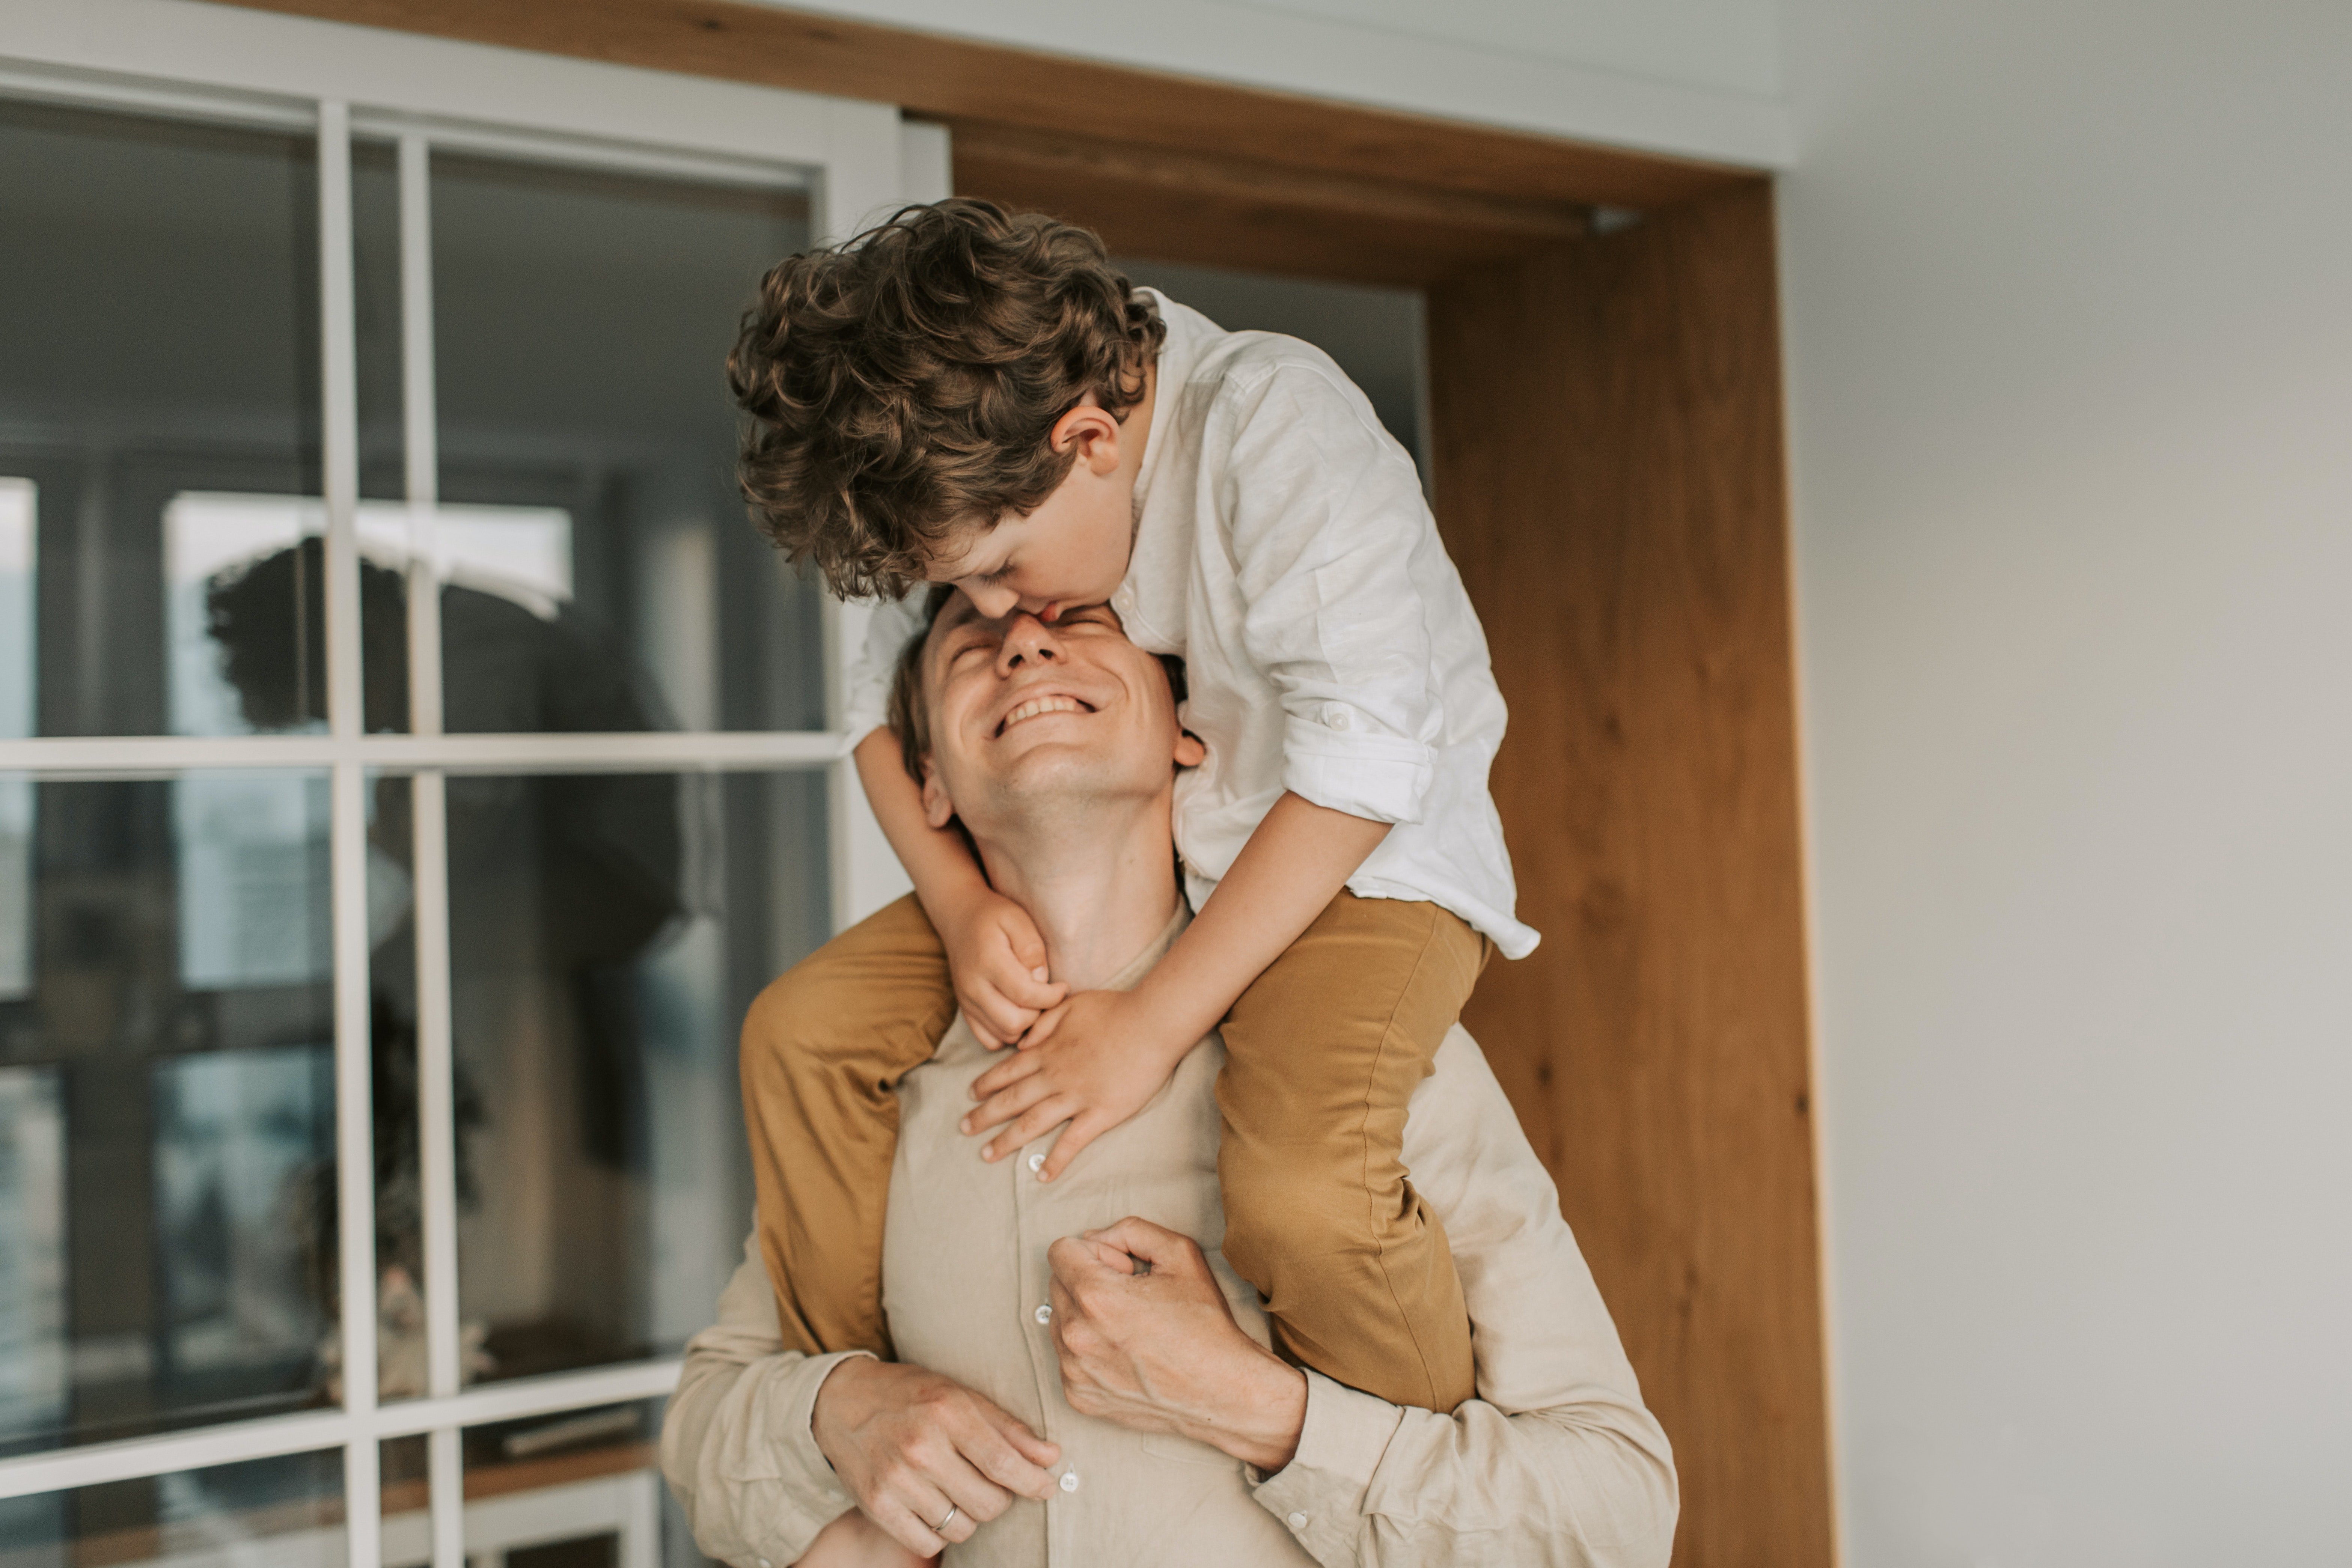 John had been the primary caregiver for most of Daniel's life and shared a deeper bond with him which is why he was awarded custody | Source: Pexels